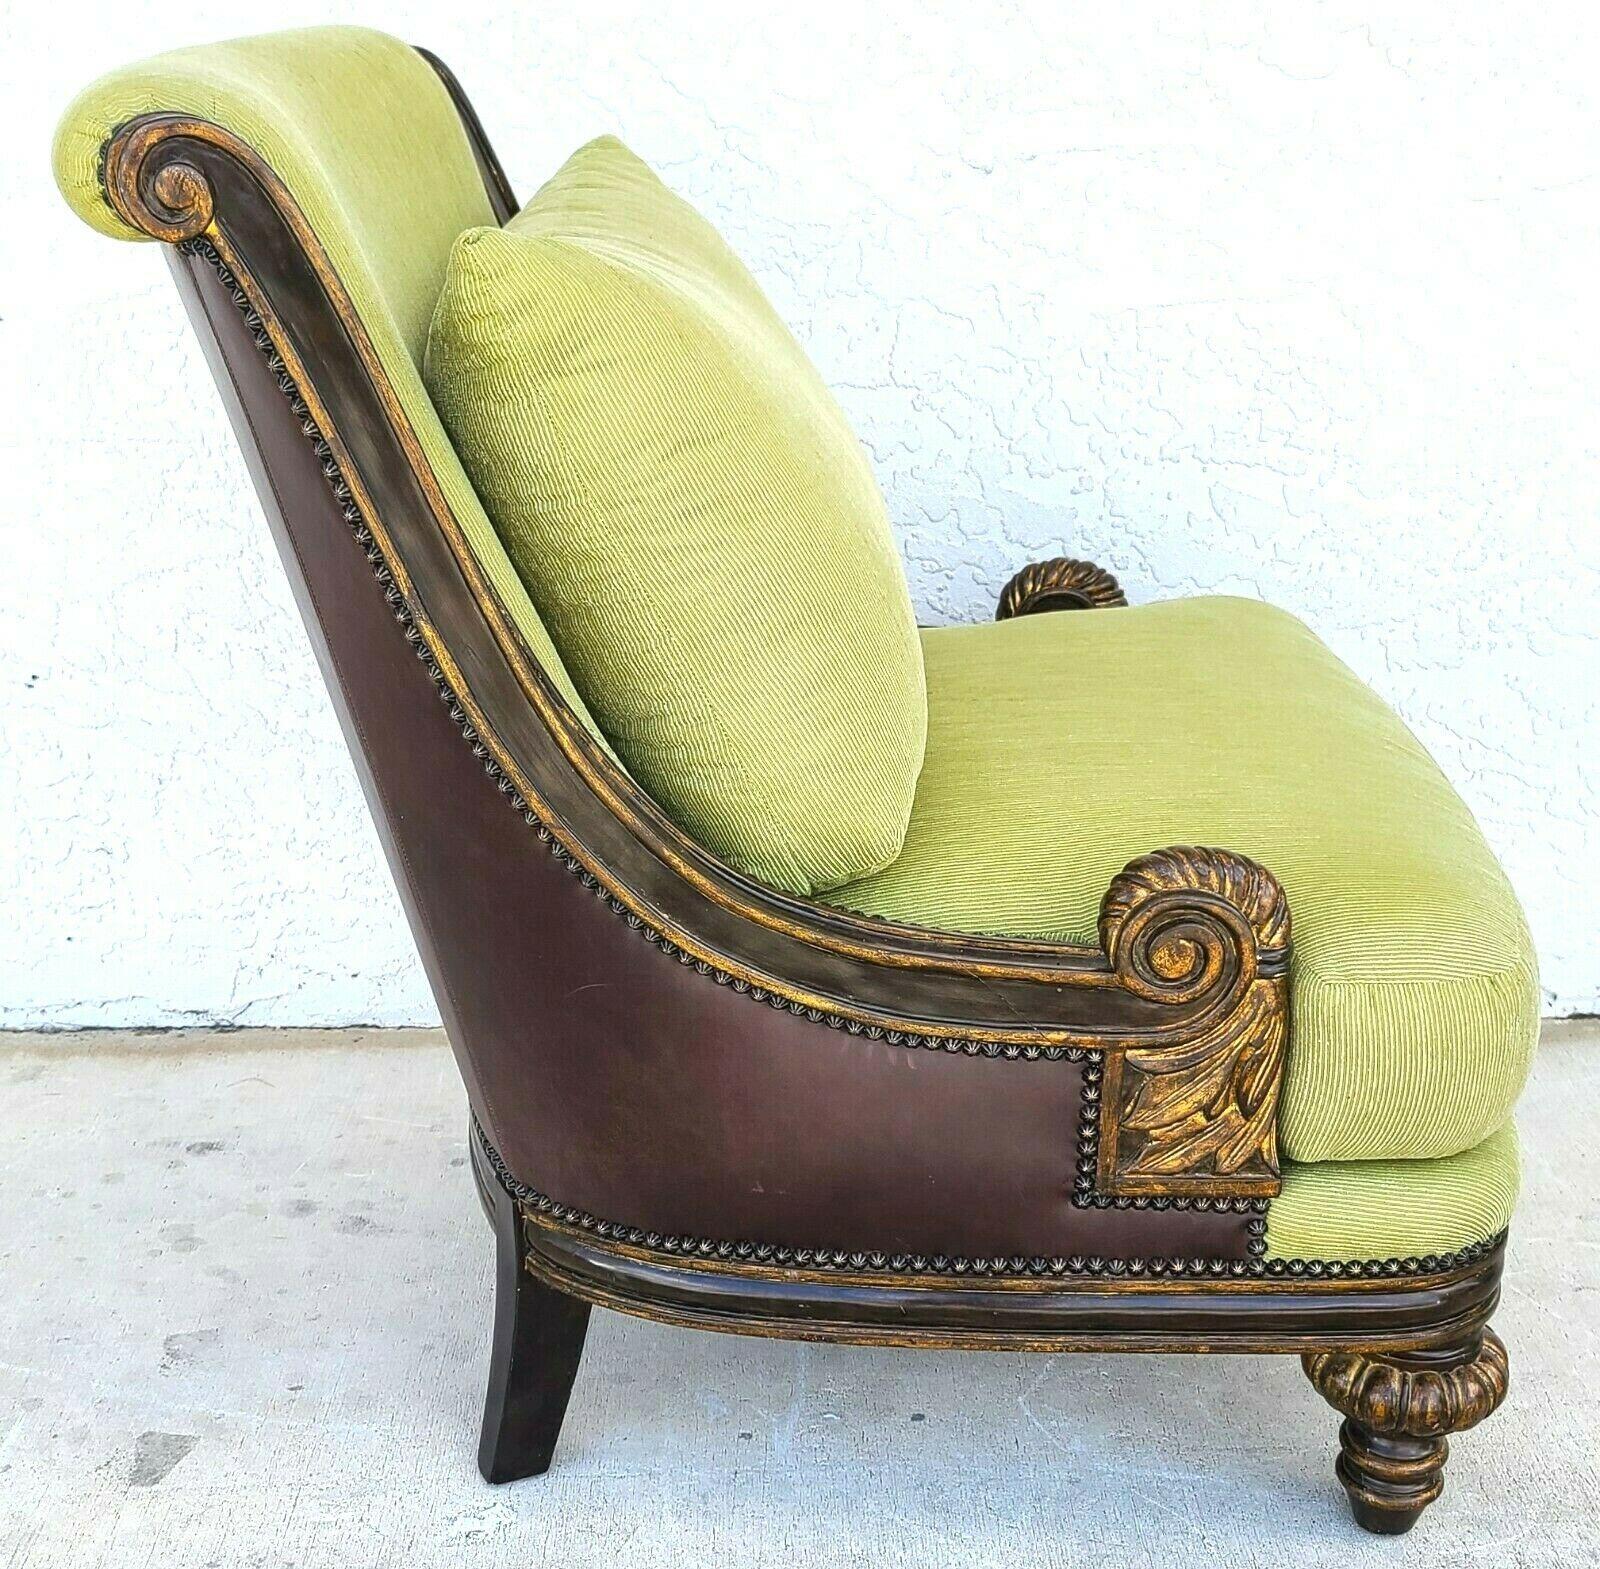 Marge Carson Huntington Manor lounge chairs Model HT49
Impressively scaled with Leatherback, distressed wood finish highlighted with subtle gilt accents, and French nail trim.

Approximate Measurements in Inches
41